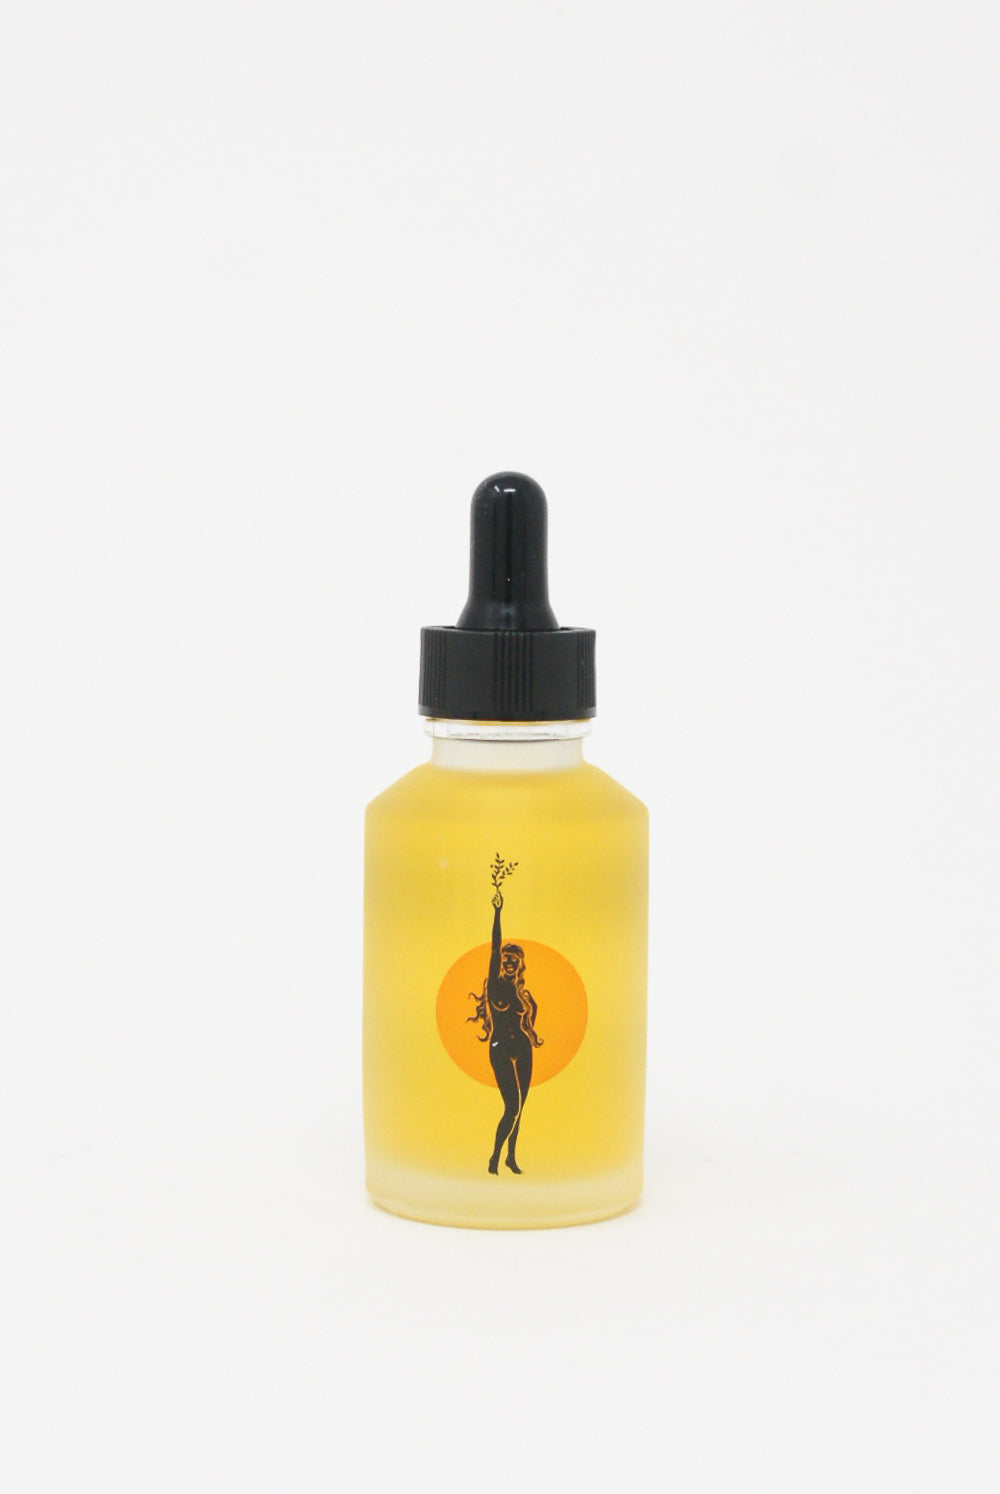 A bottle of Wonder Serum infused with hyaluronic acid, featuring a silhouette of a woman by Wonder Valley.